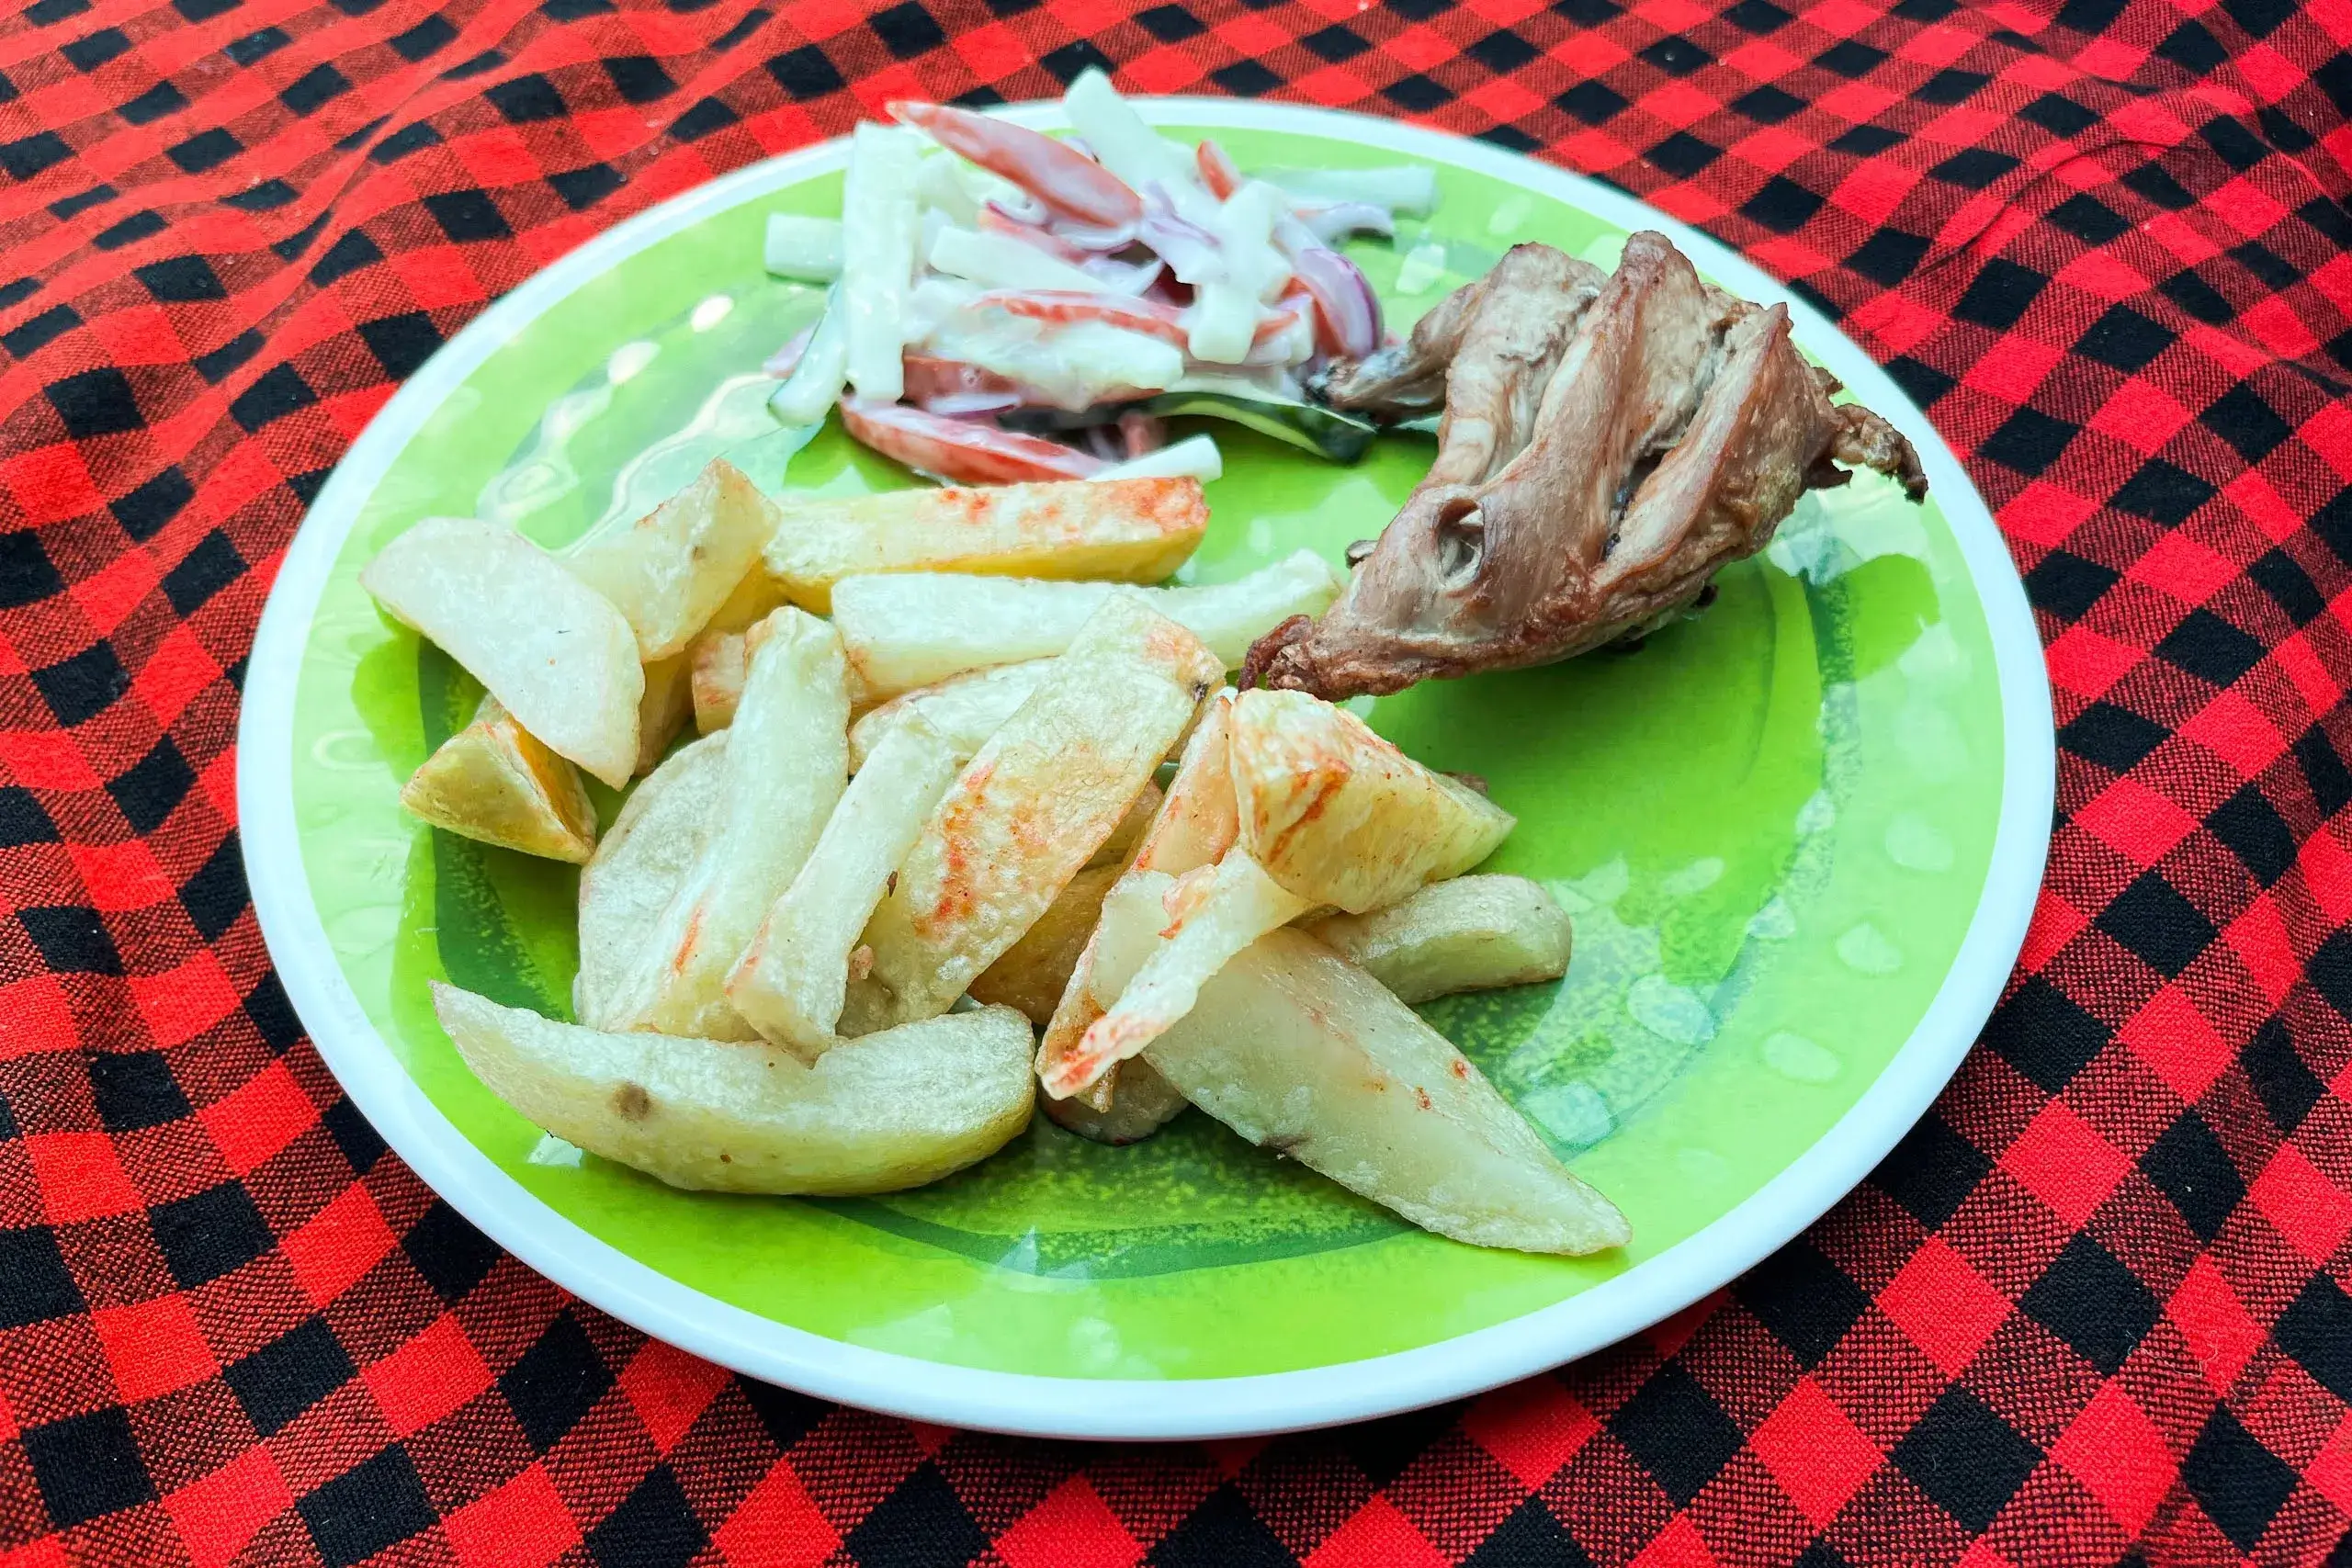 Food for our safari and trek travelers - consists of wedges, meat and some salad